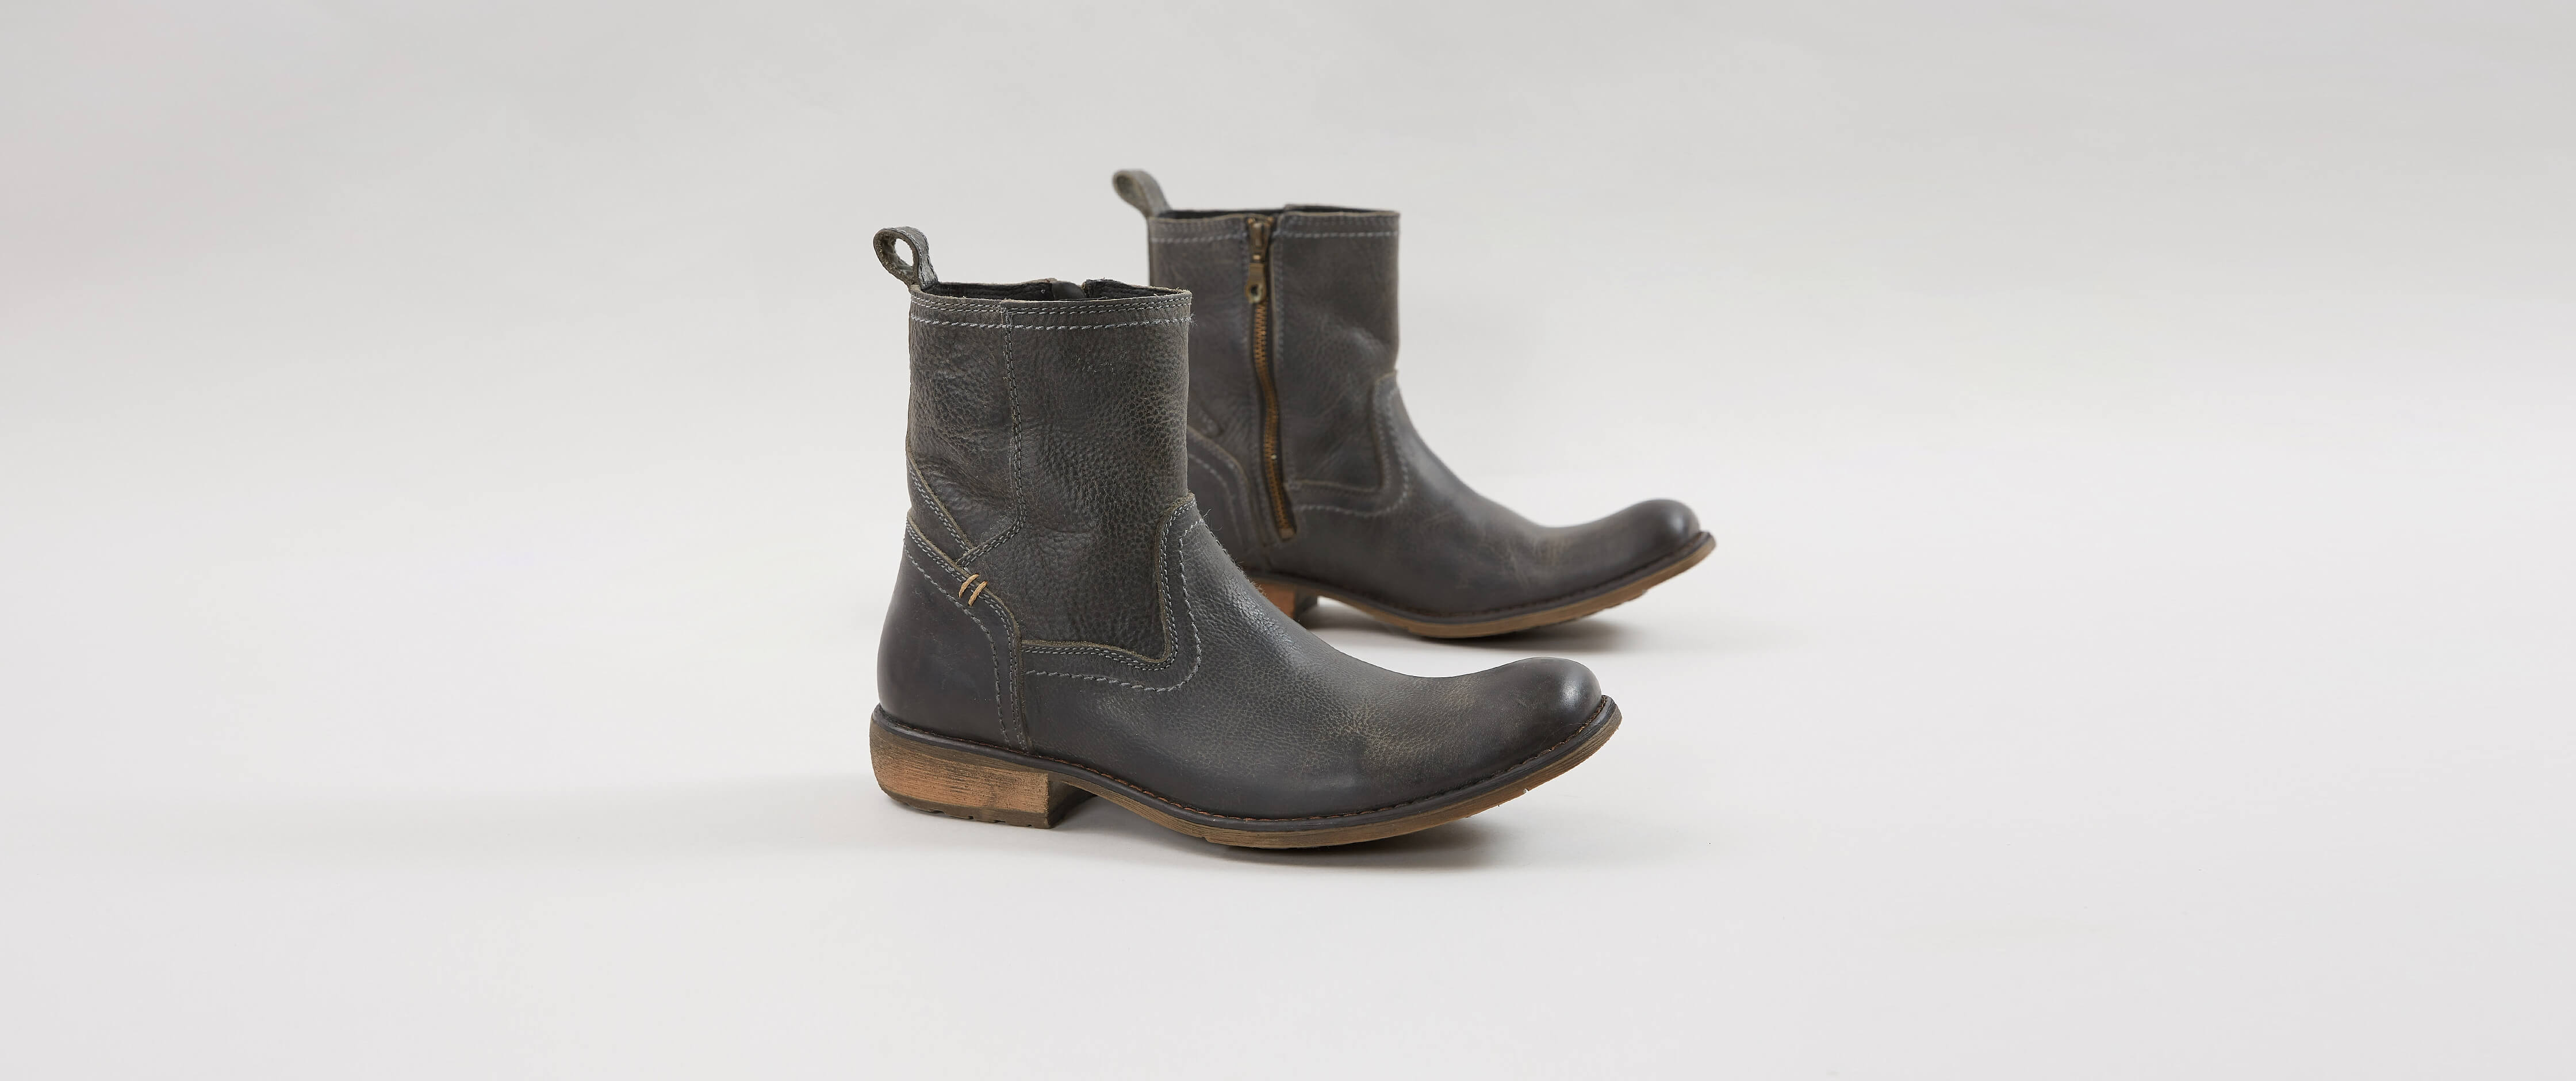 roan boots